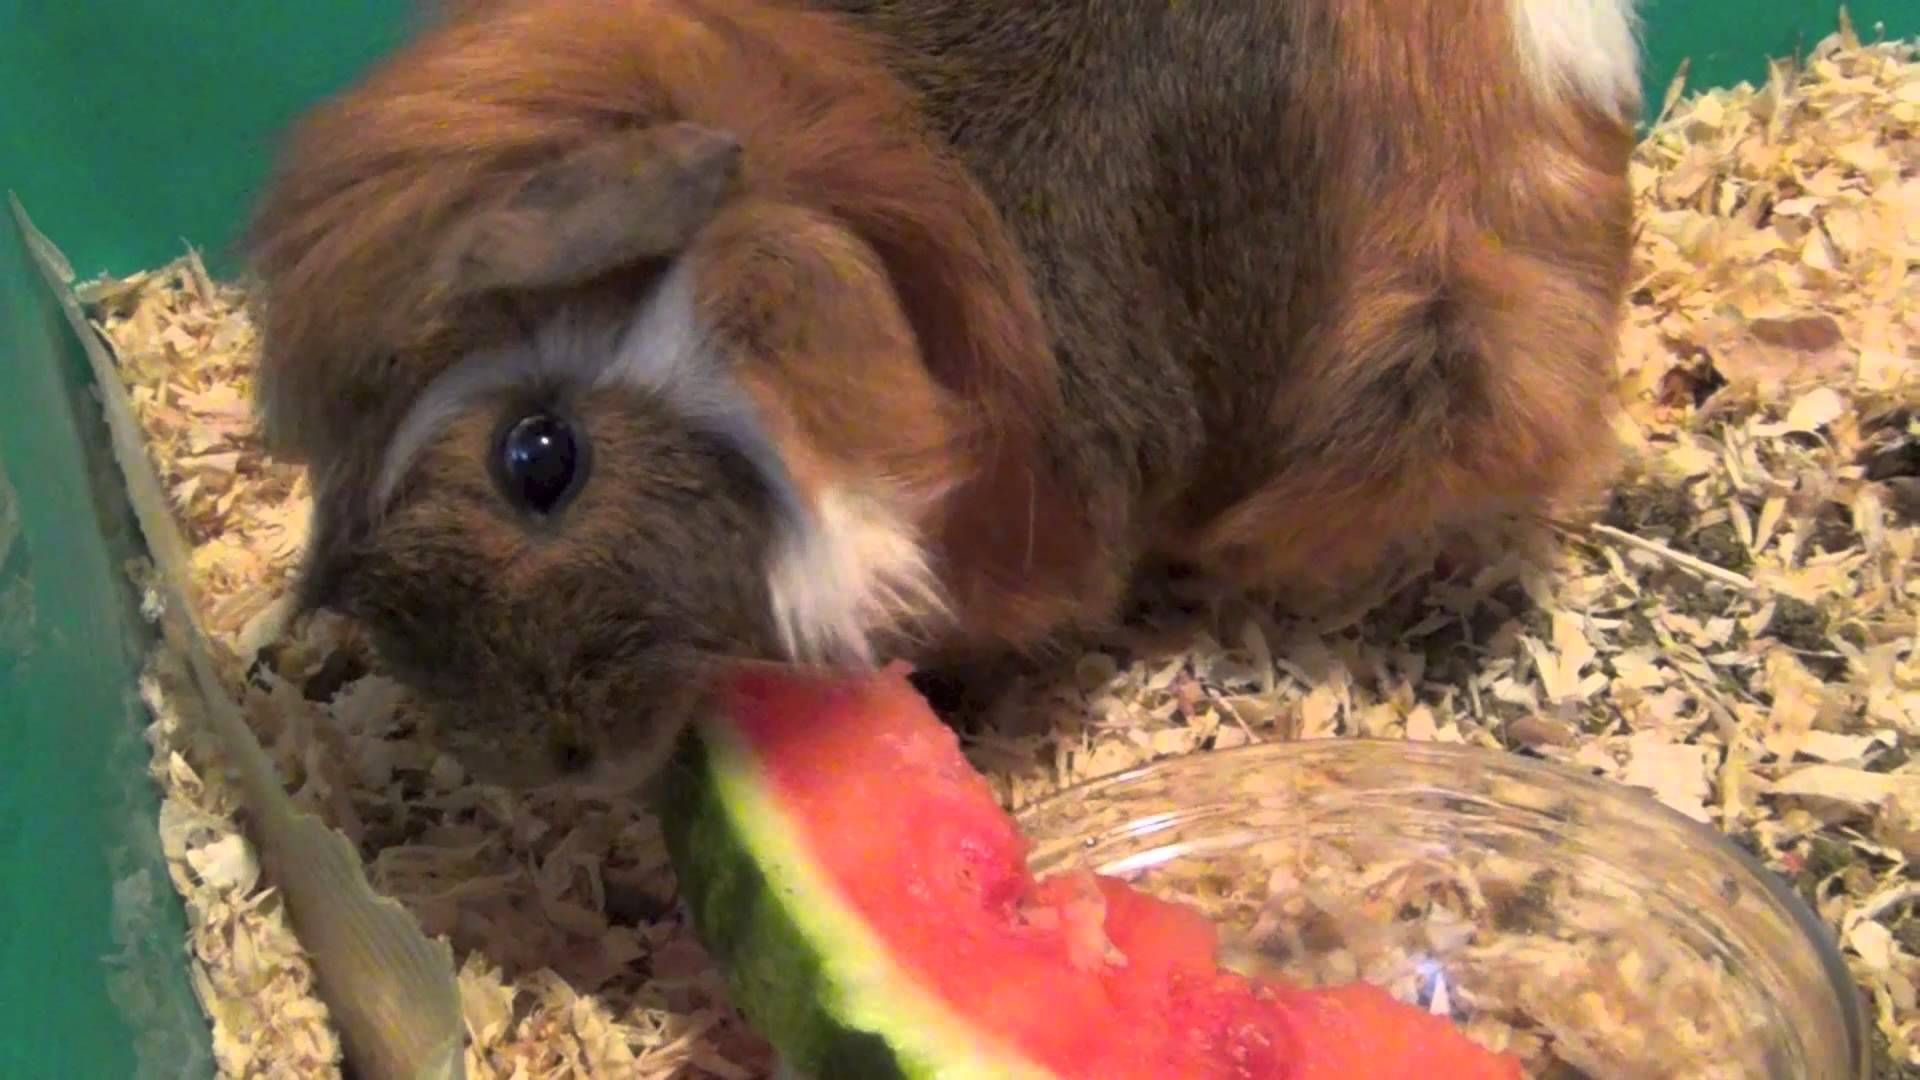 Can Guinea Pigs Eat Watermelon | Pigs, Watermelon and Guinea pigs